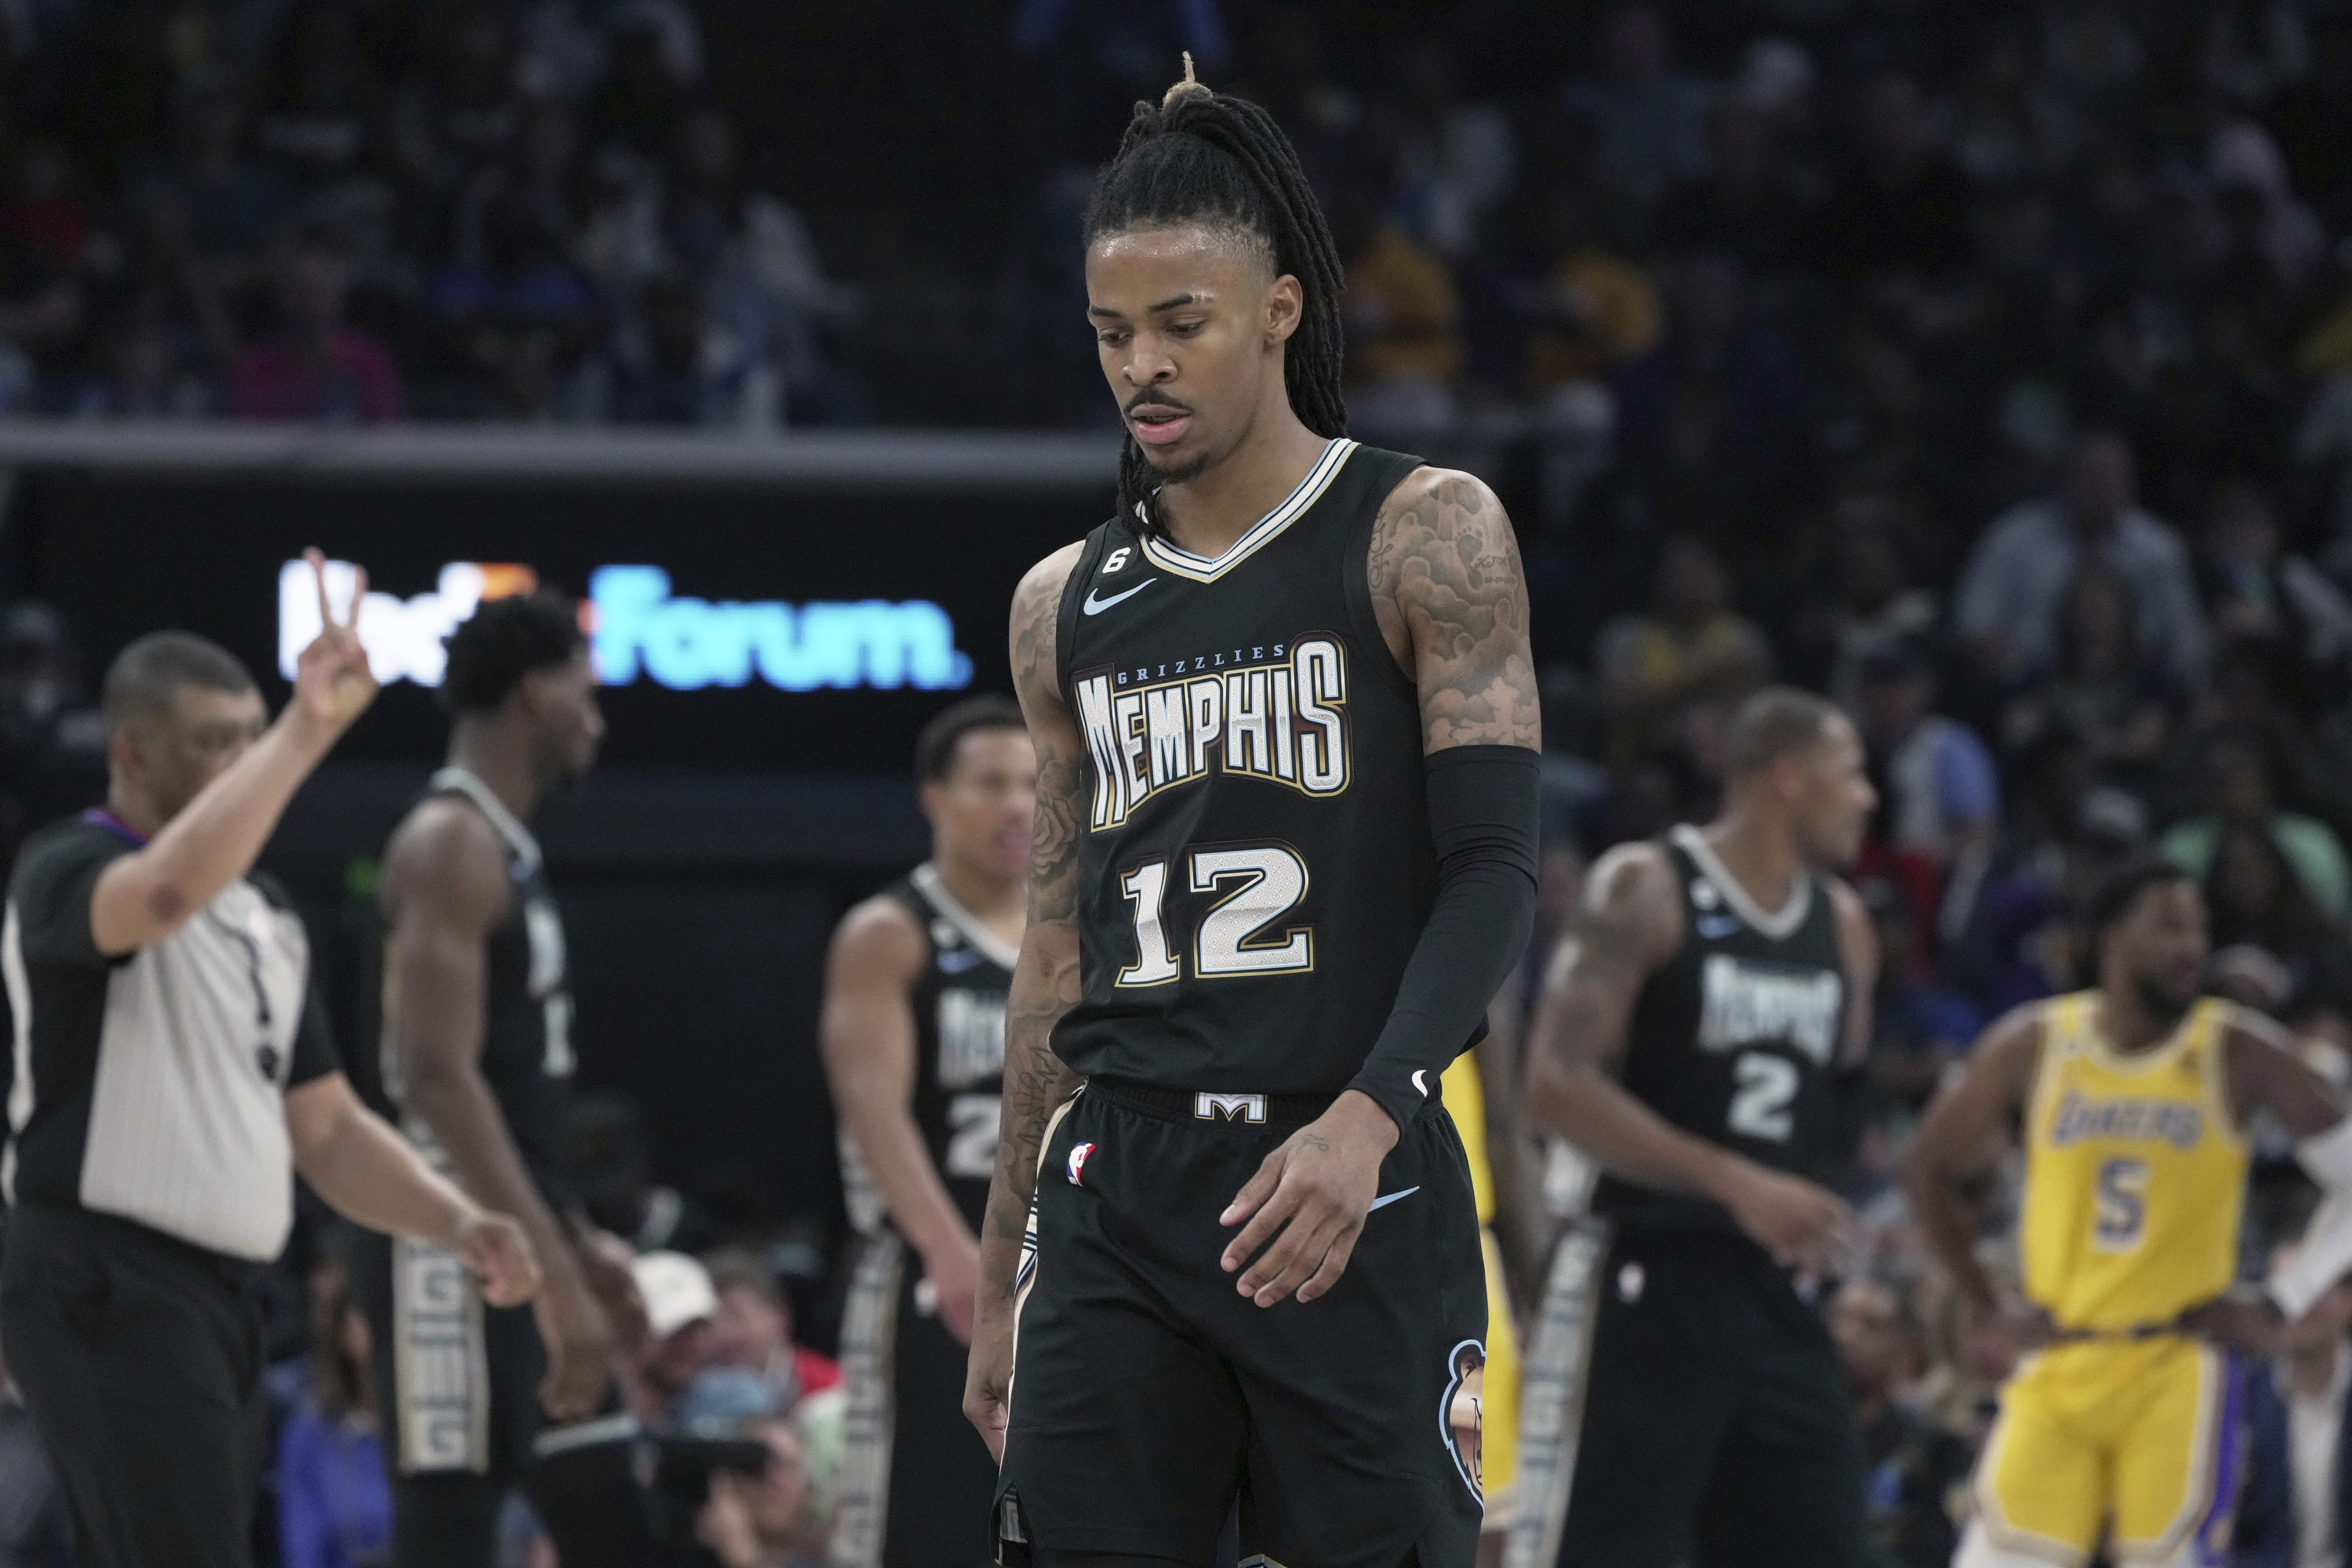 NBA decides to suspend Ja Morant for 25 games after second gun